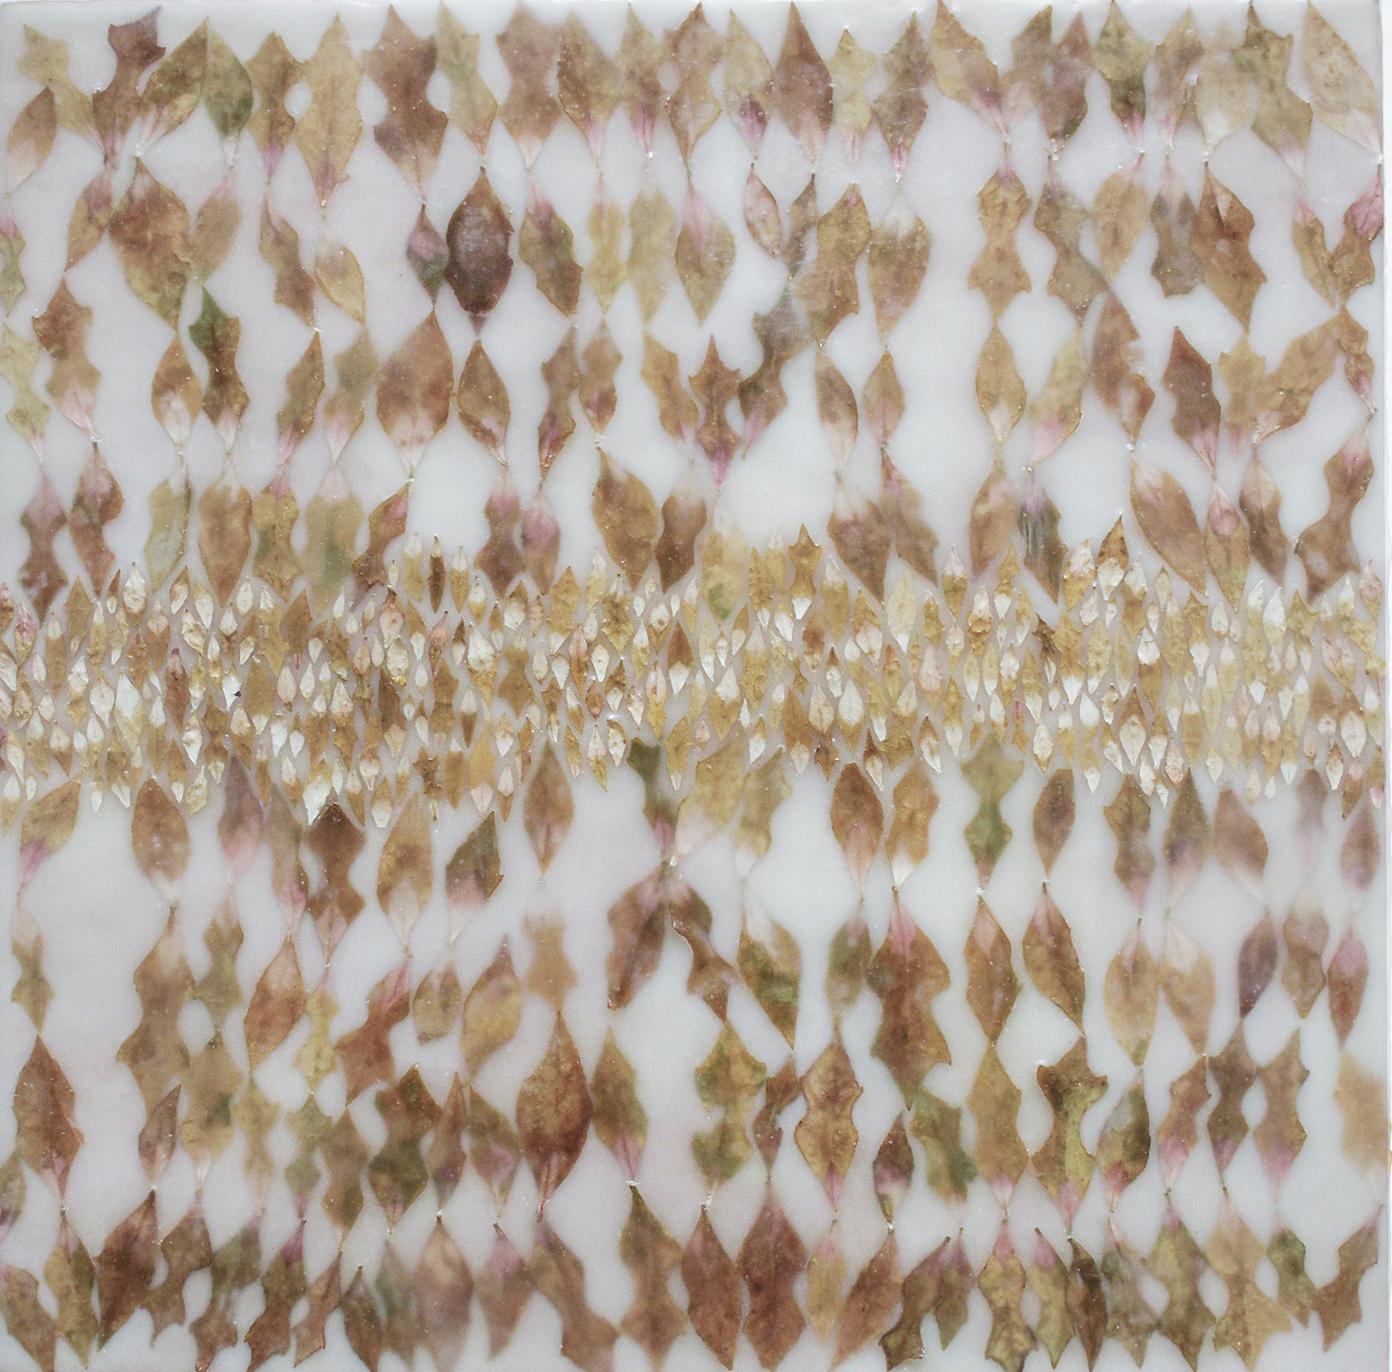 Euphorbic 15 (Abstract Encaustic Painting with Beige & Green Leaves on White) - Mixed Media Art by Allyson Levy